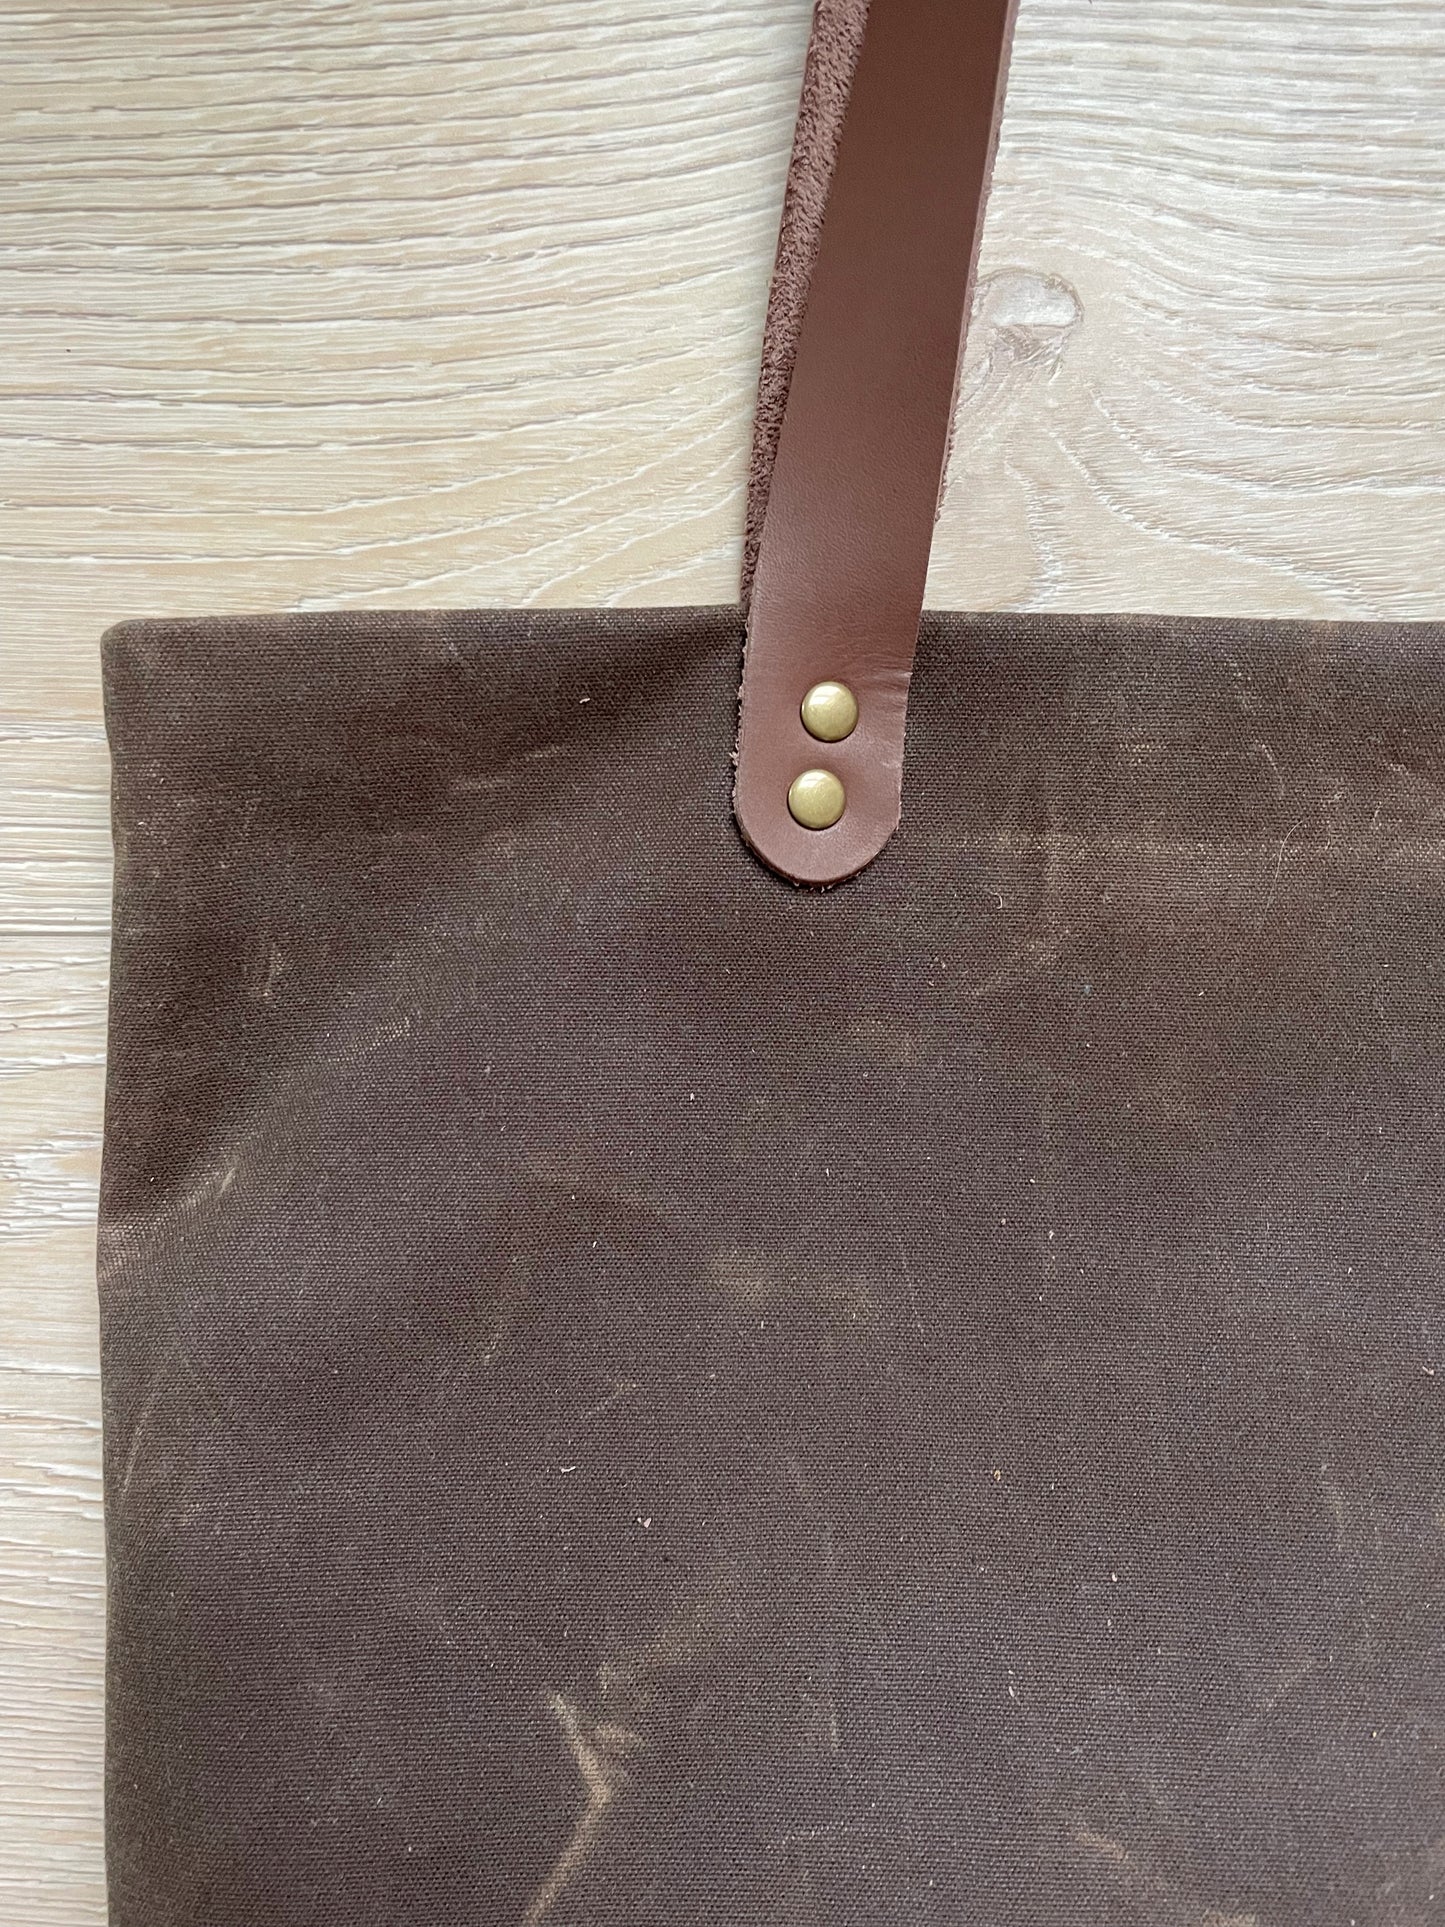 Brown waxed canvas tote bag